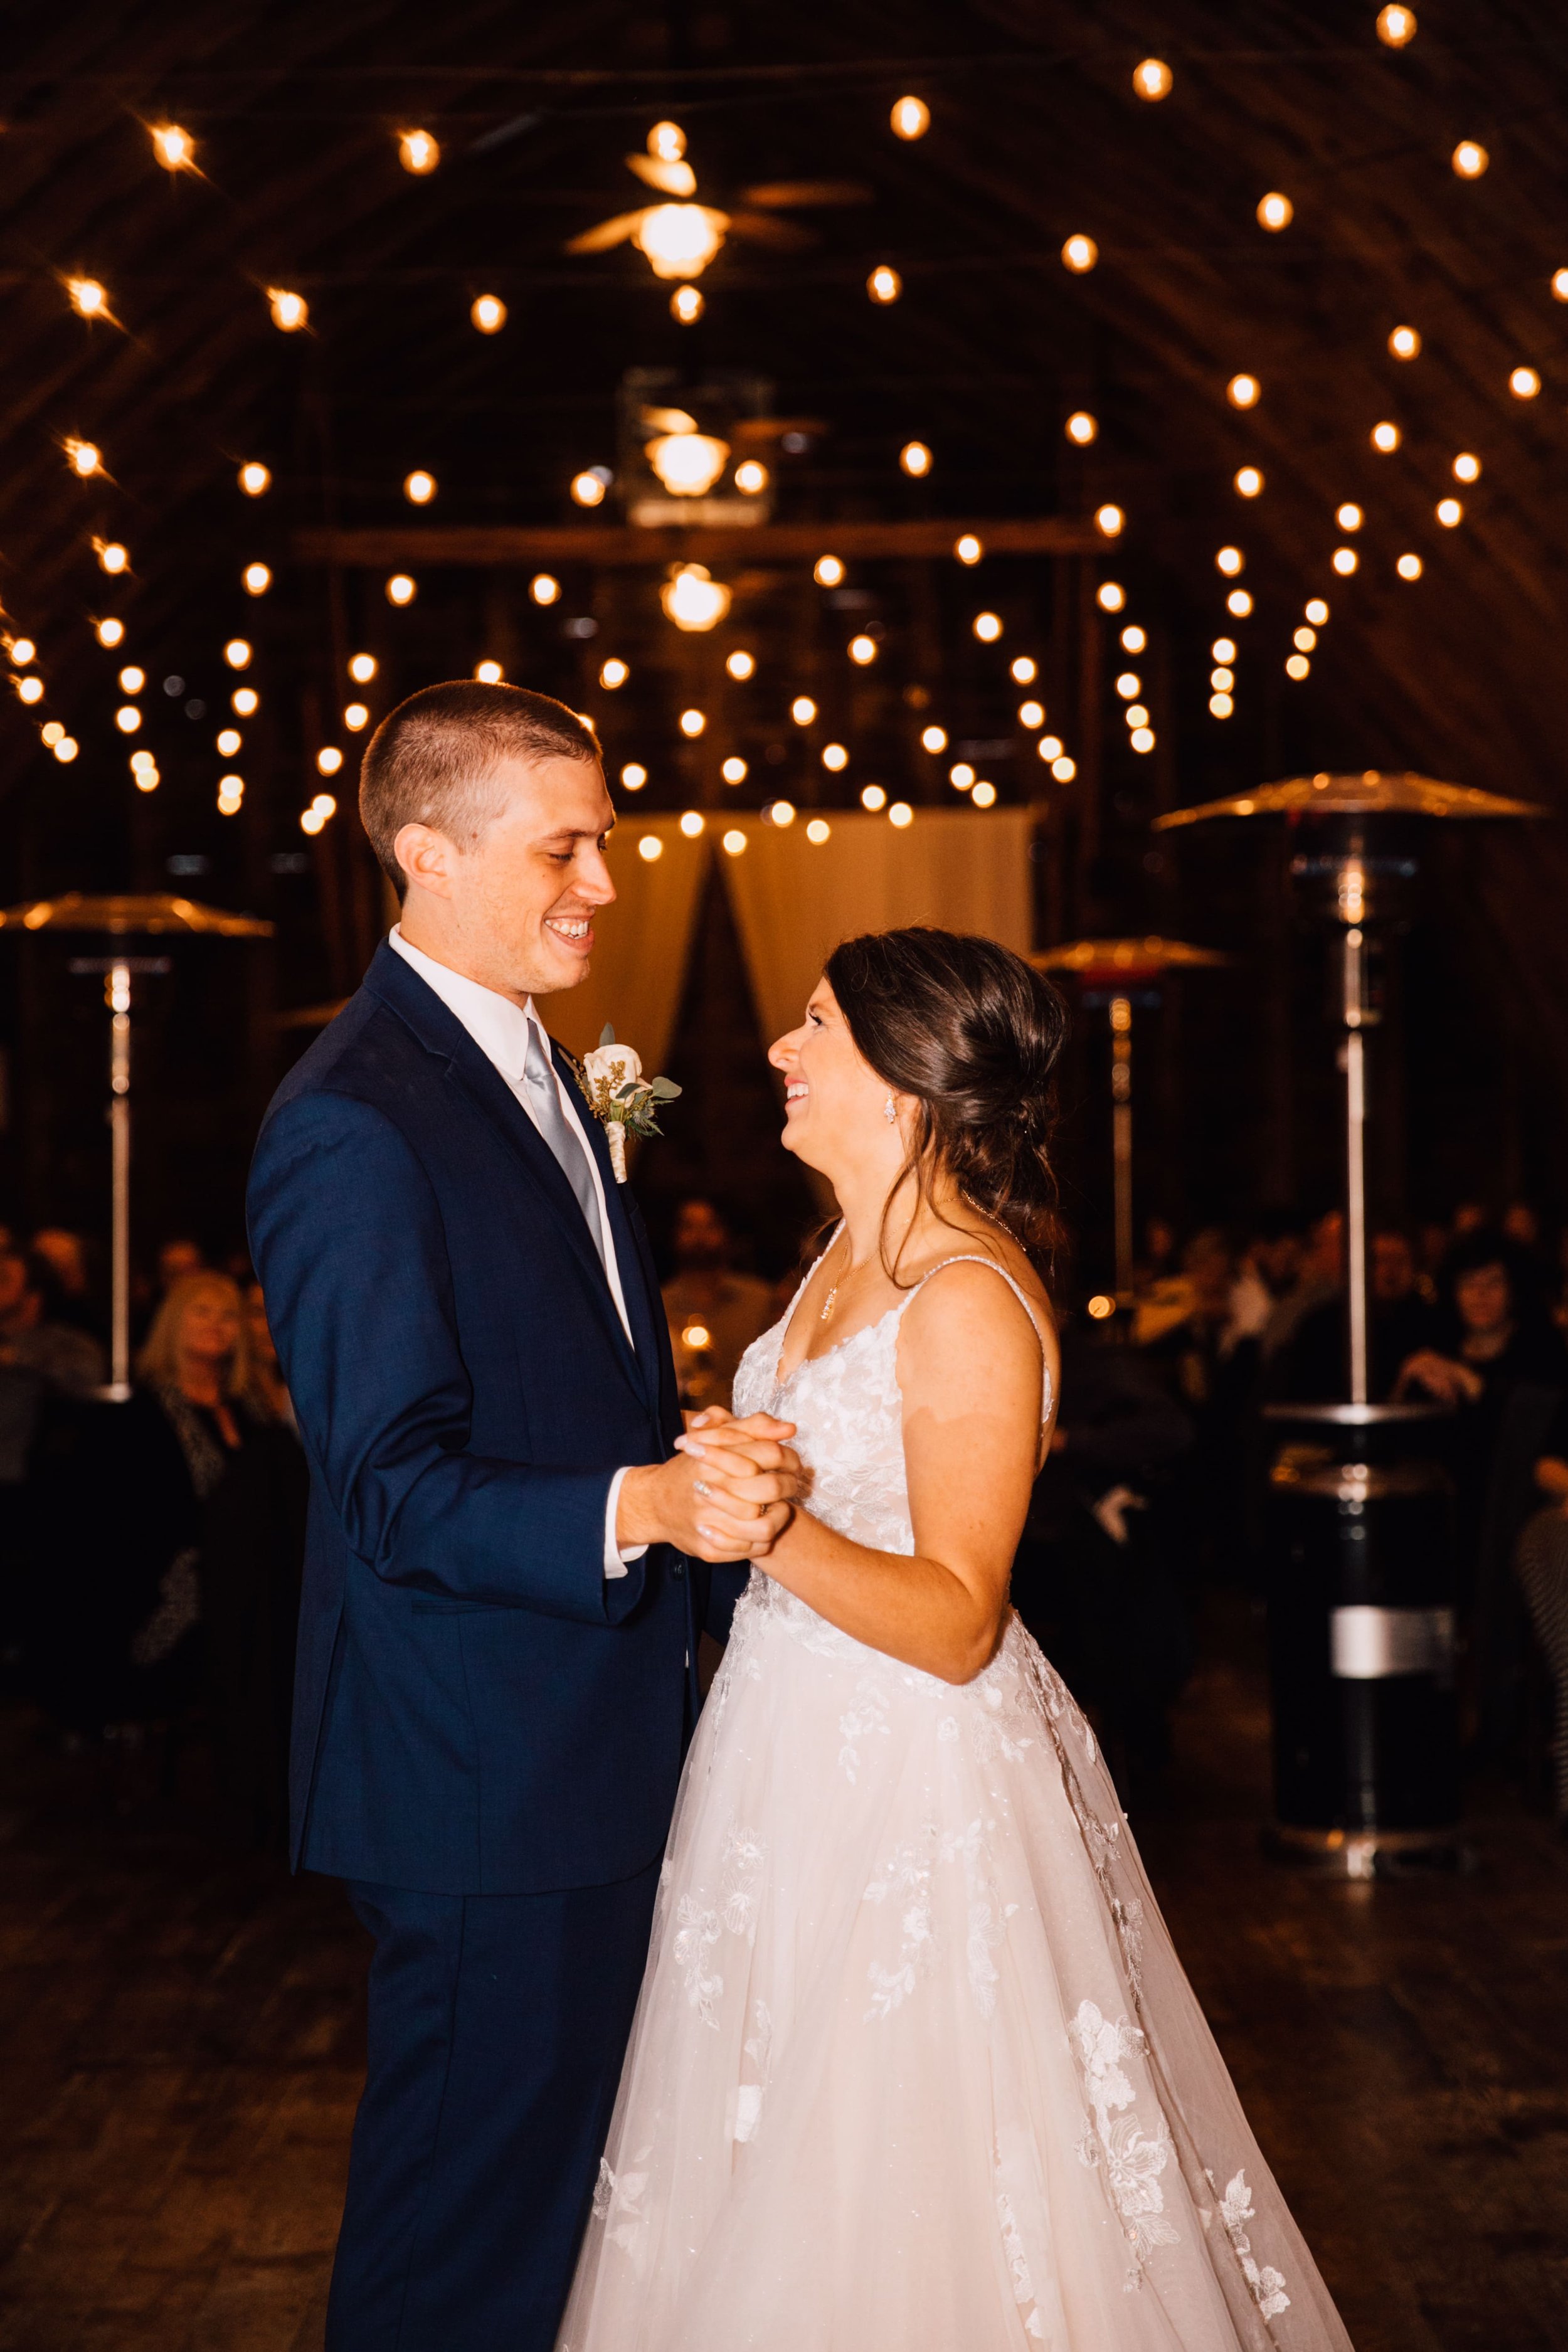  the bride and groom share their first dance at their rustic fall wedding reception 